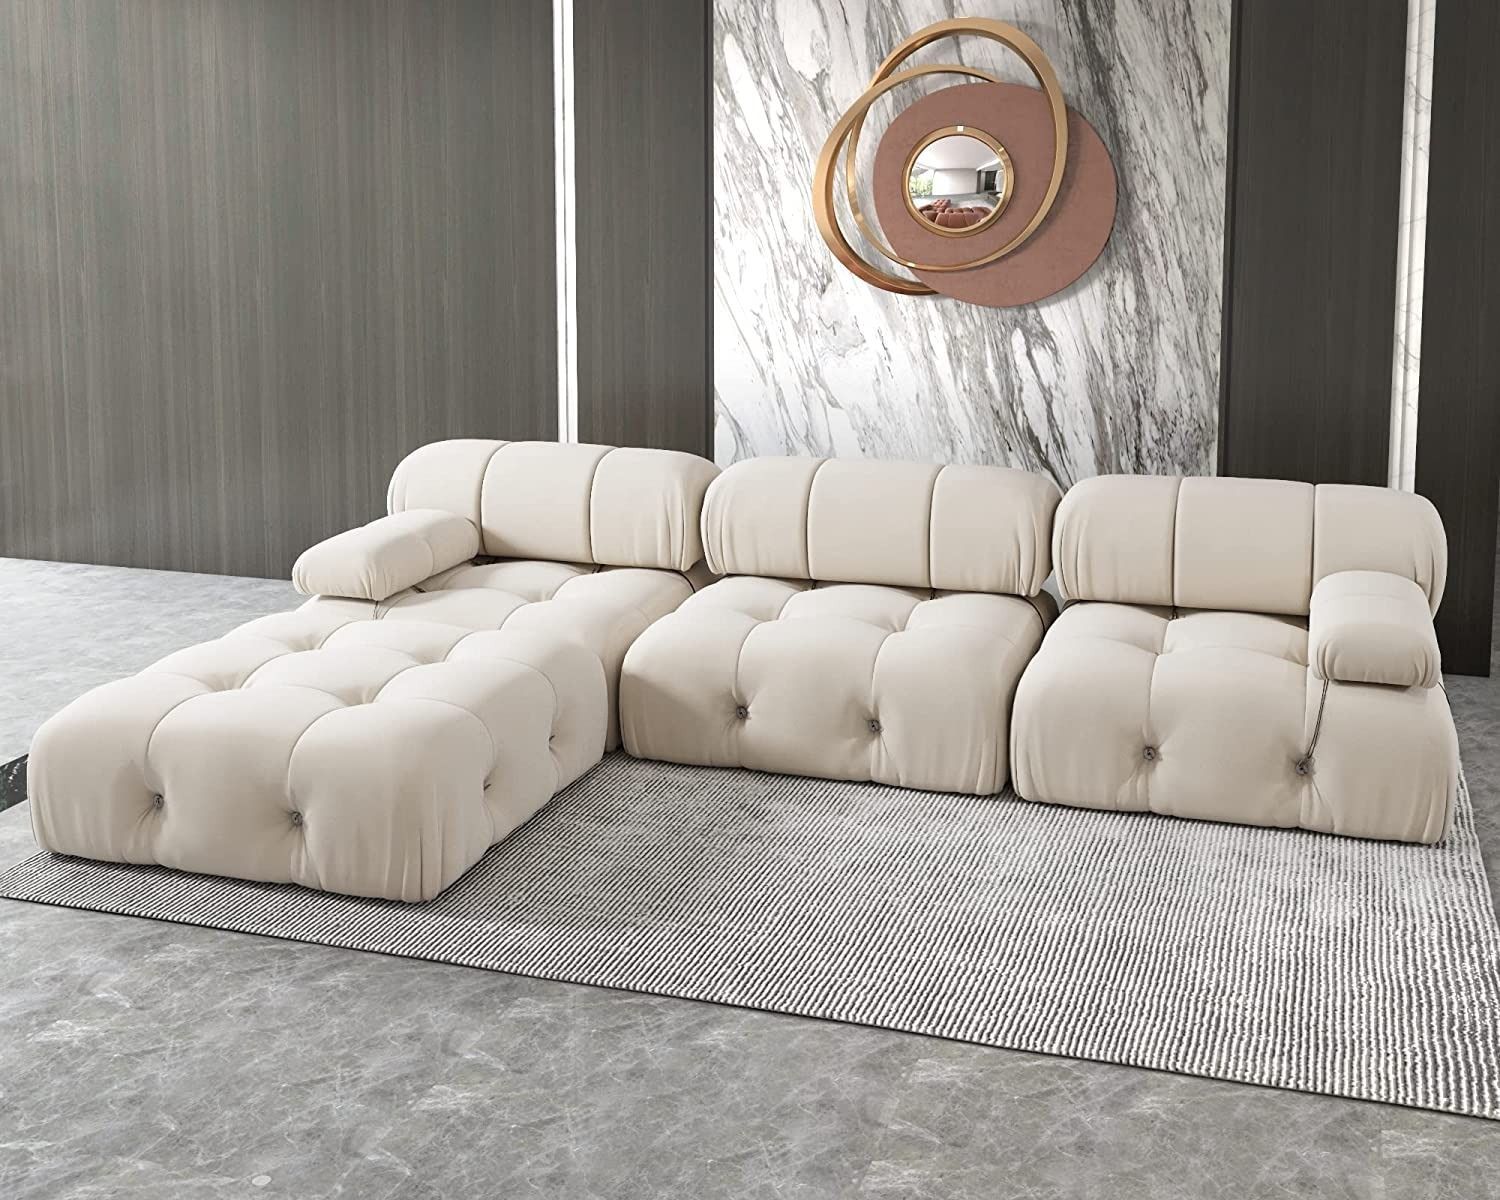 Jach 104" Convertible Modular Sectional Sofa, L Shaped Minimalist Inside 104" Sectional Sofas (Photo 15 of 15)